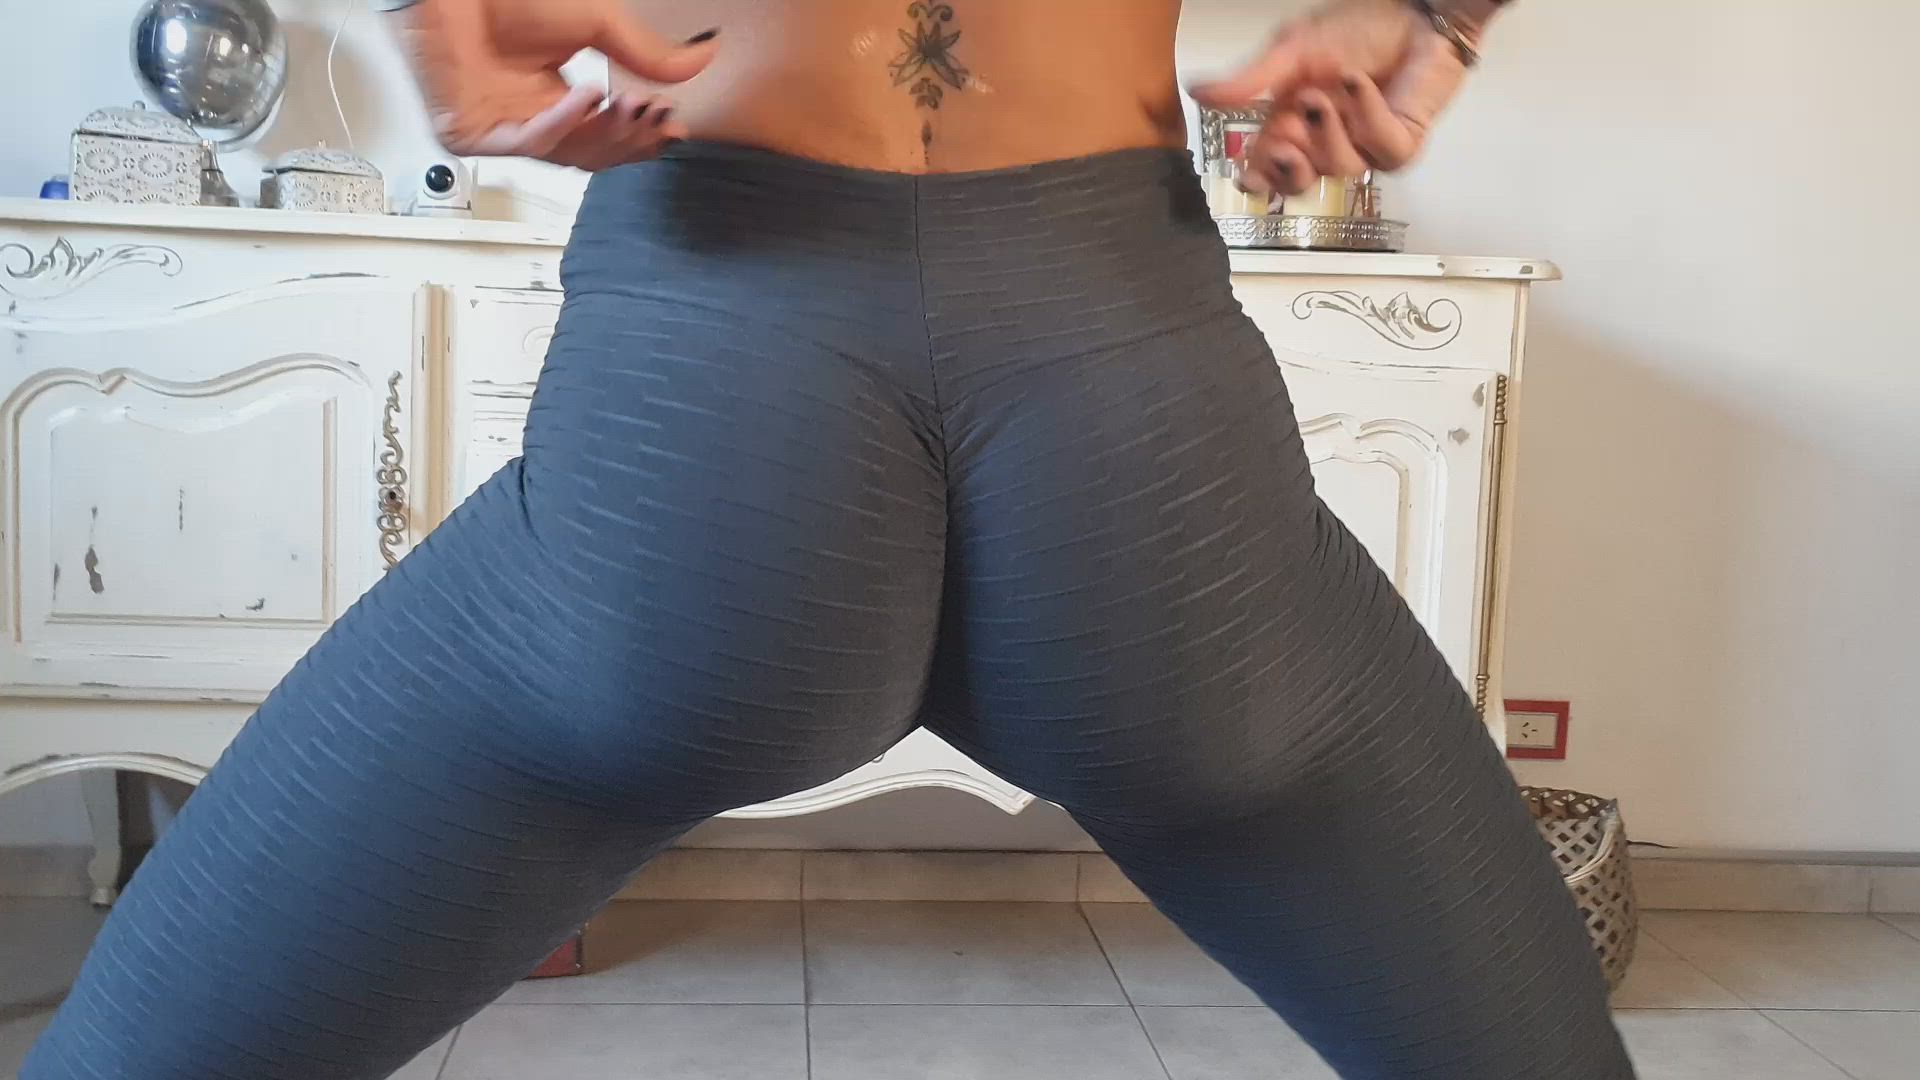 Ass porn video with onlyfans model divinamilagros <strong>@divinamilagros</strong>